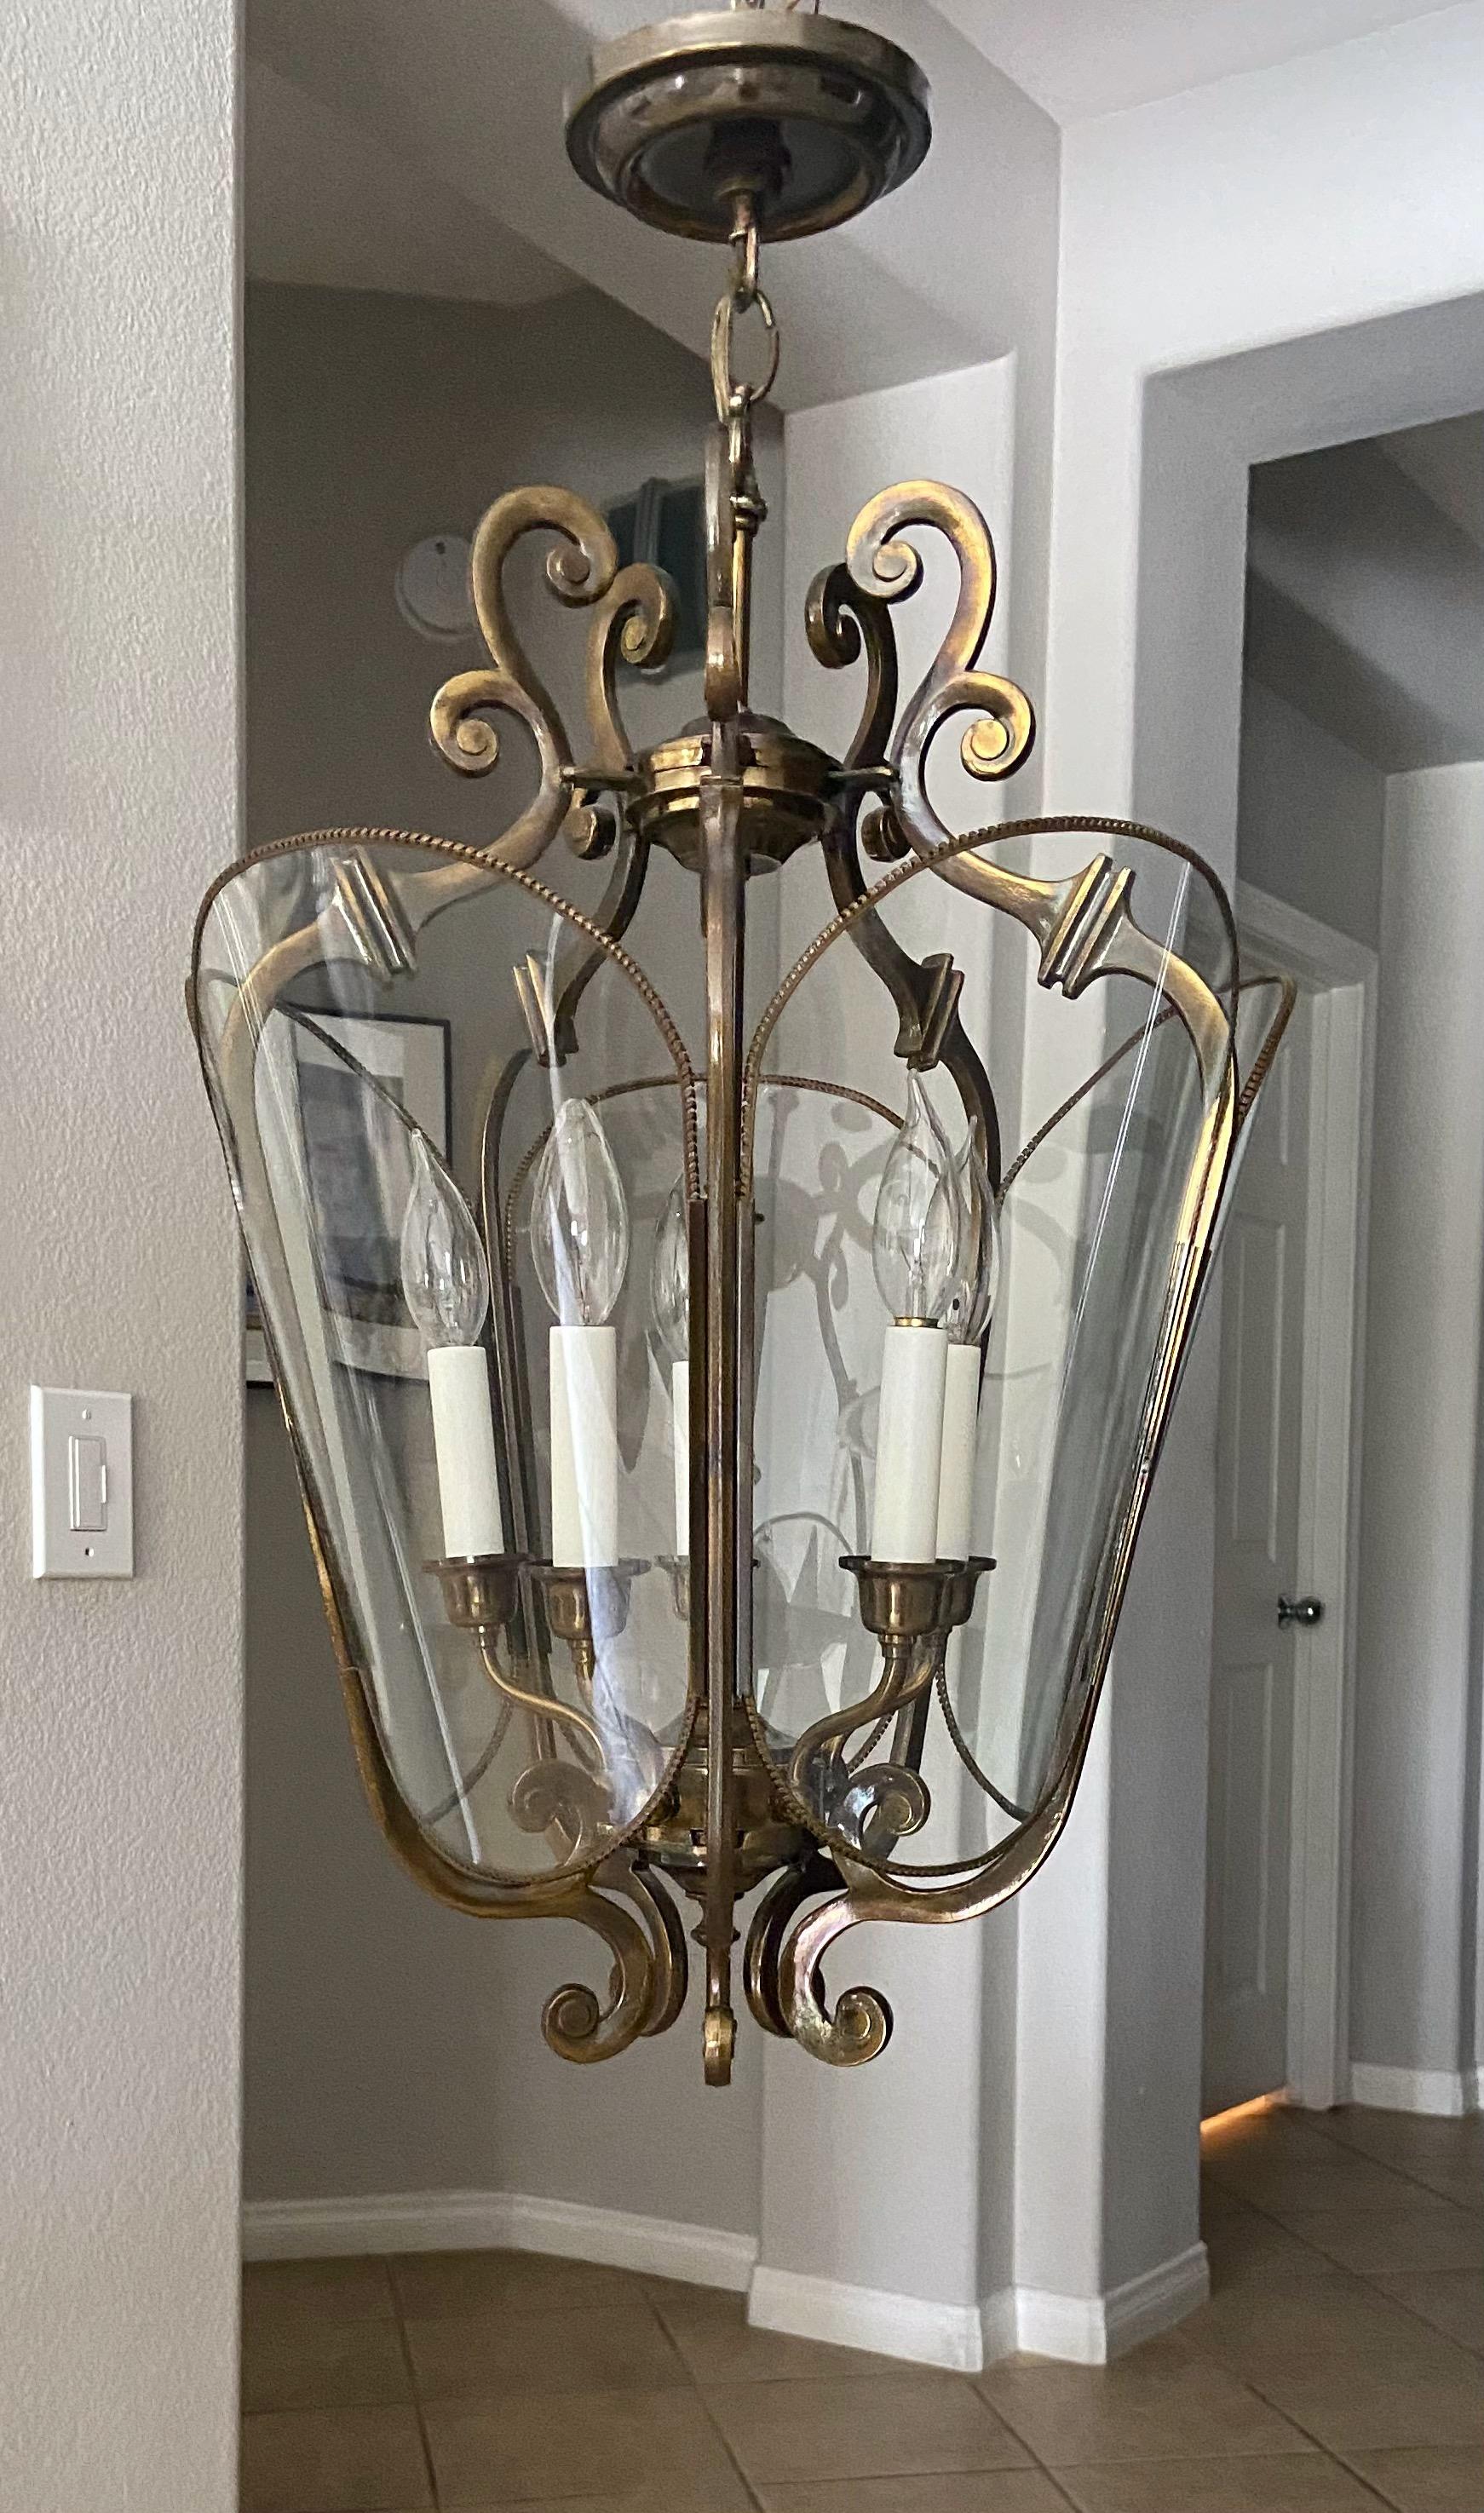 Feldman Brass 5 Light Hall Lantern or Pendant In Good Condition For Sale In Palm Springs, CA